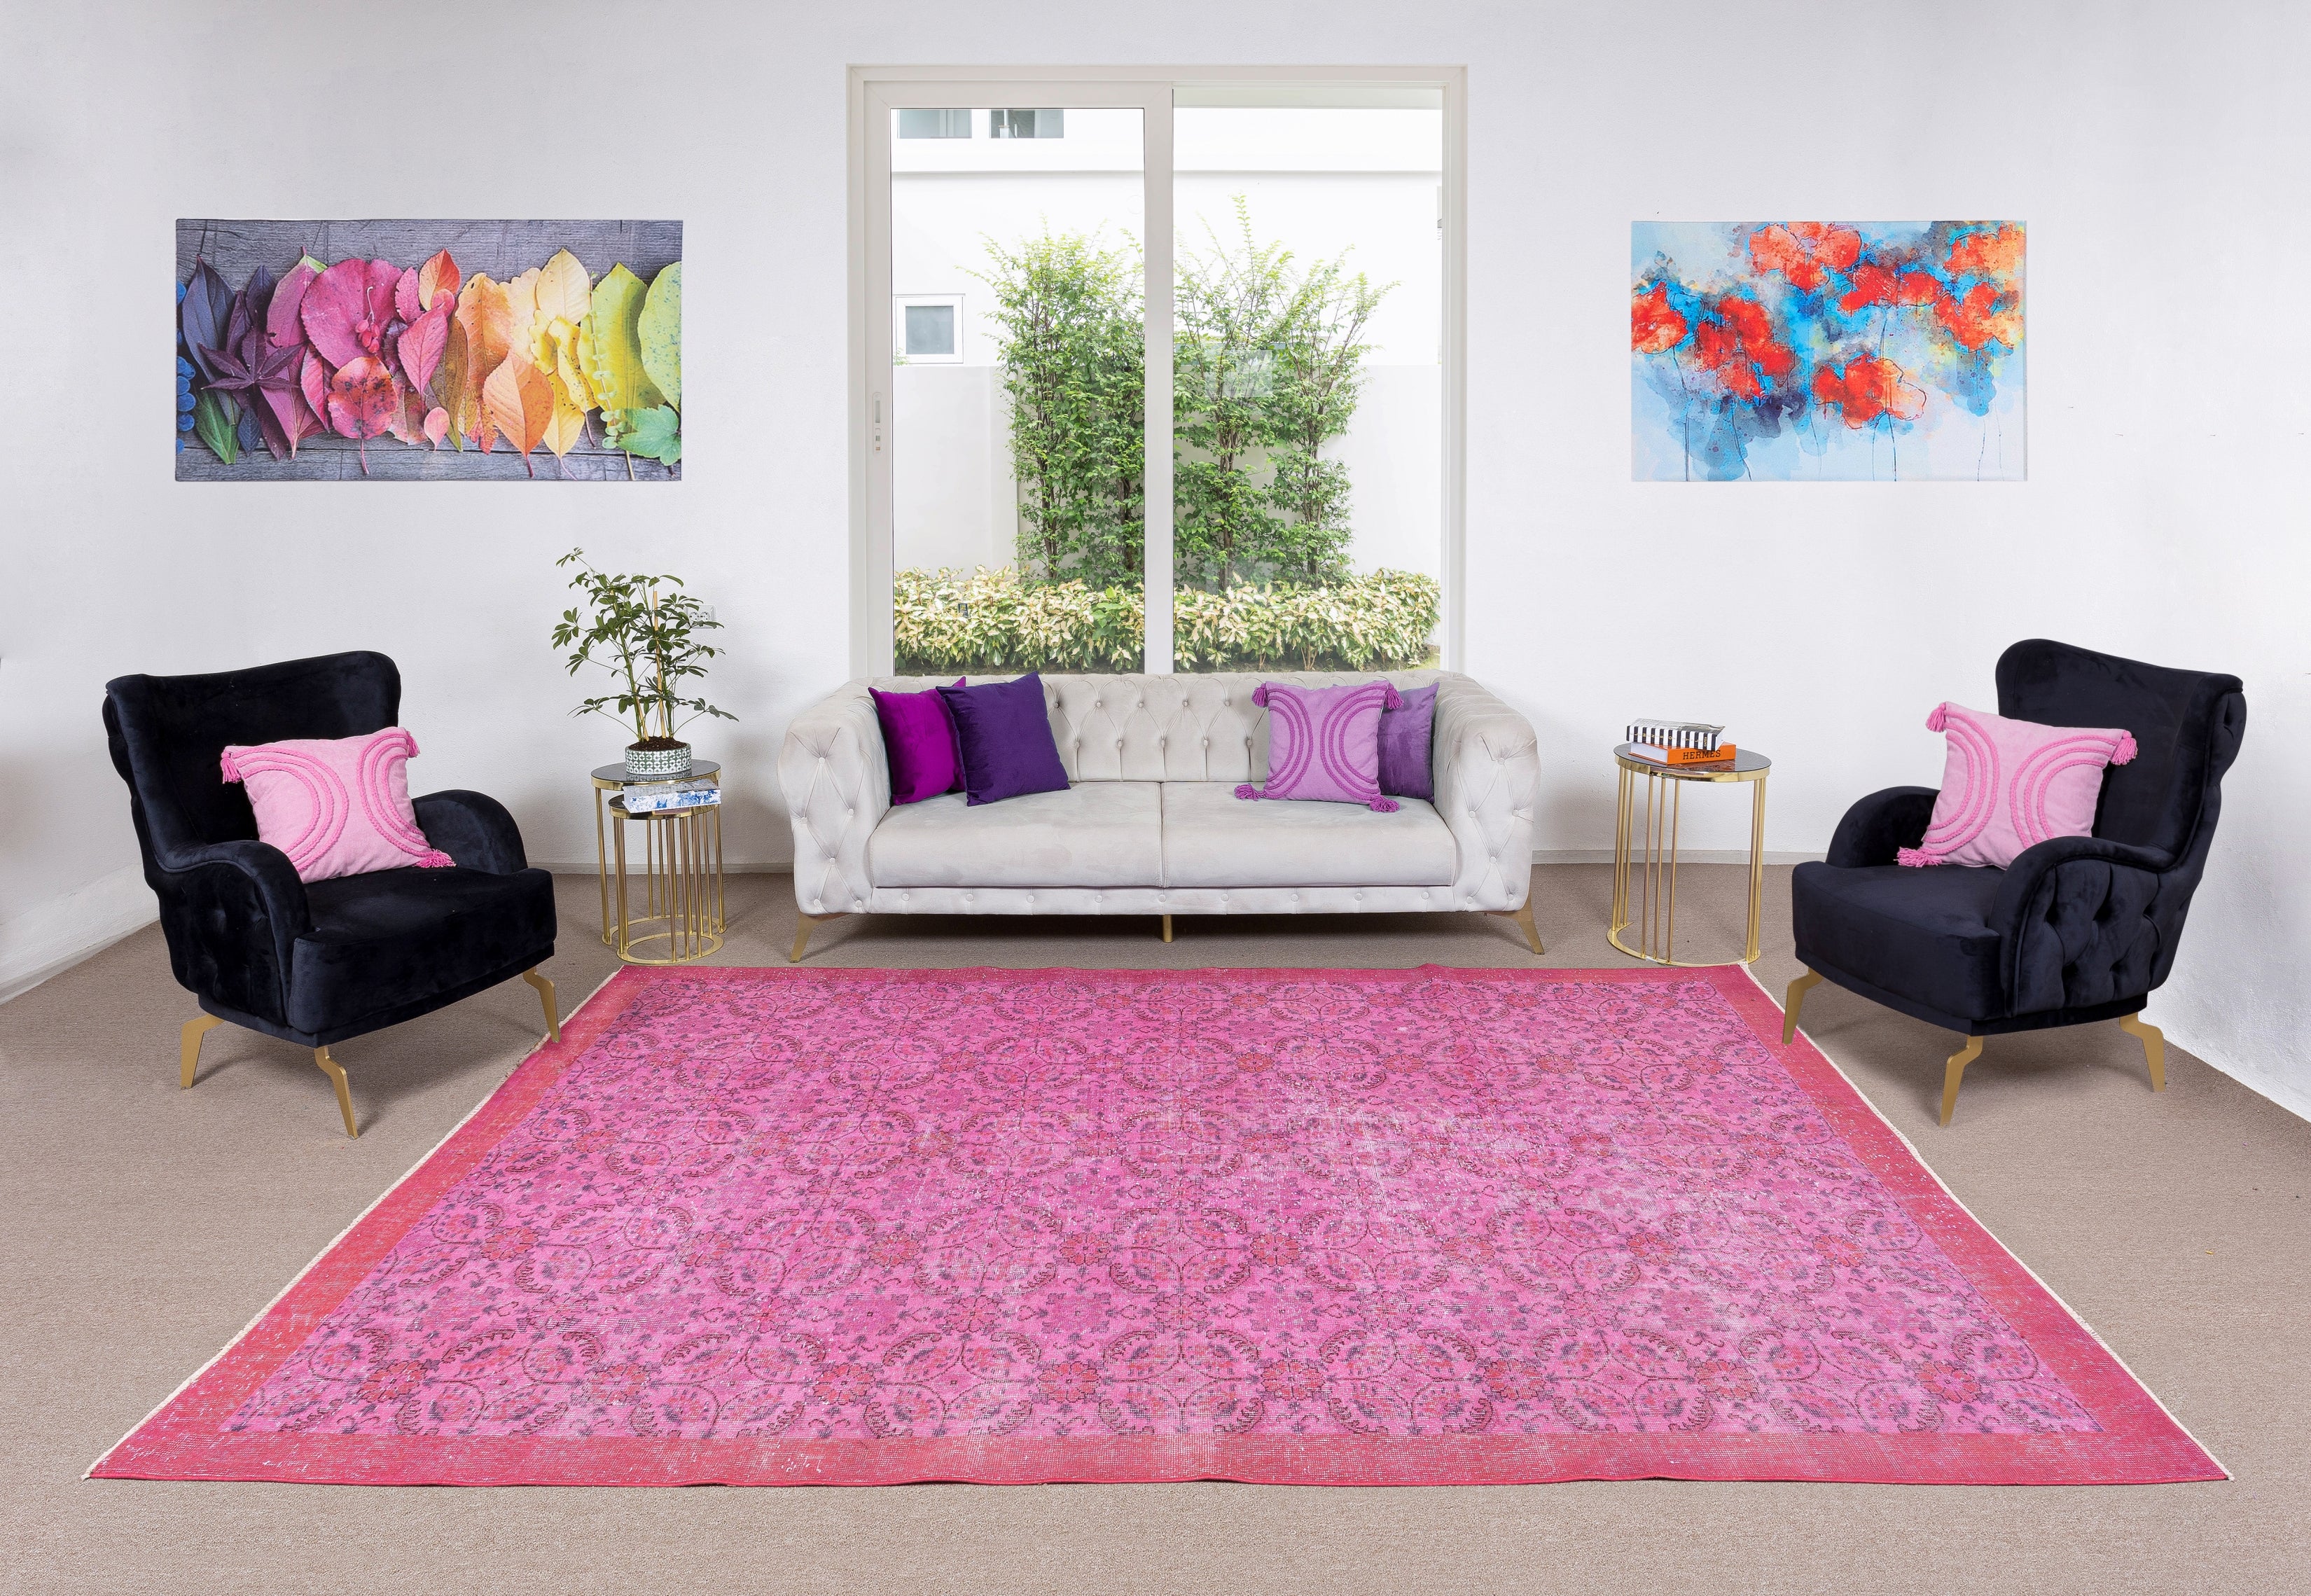 7.5x11 Ft Handmade Floral Wool Area Rug in Pink, Contemporary Turkish Carpet For Sale